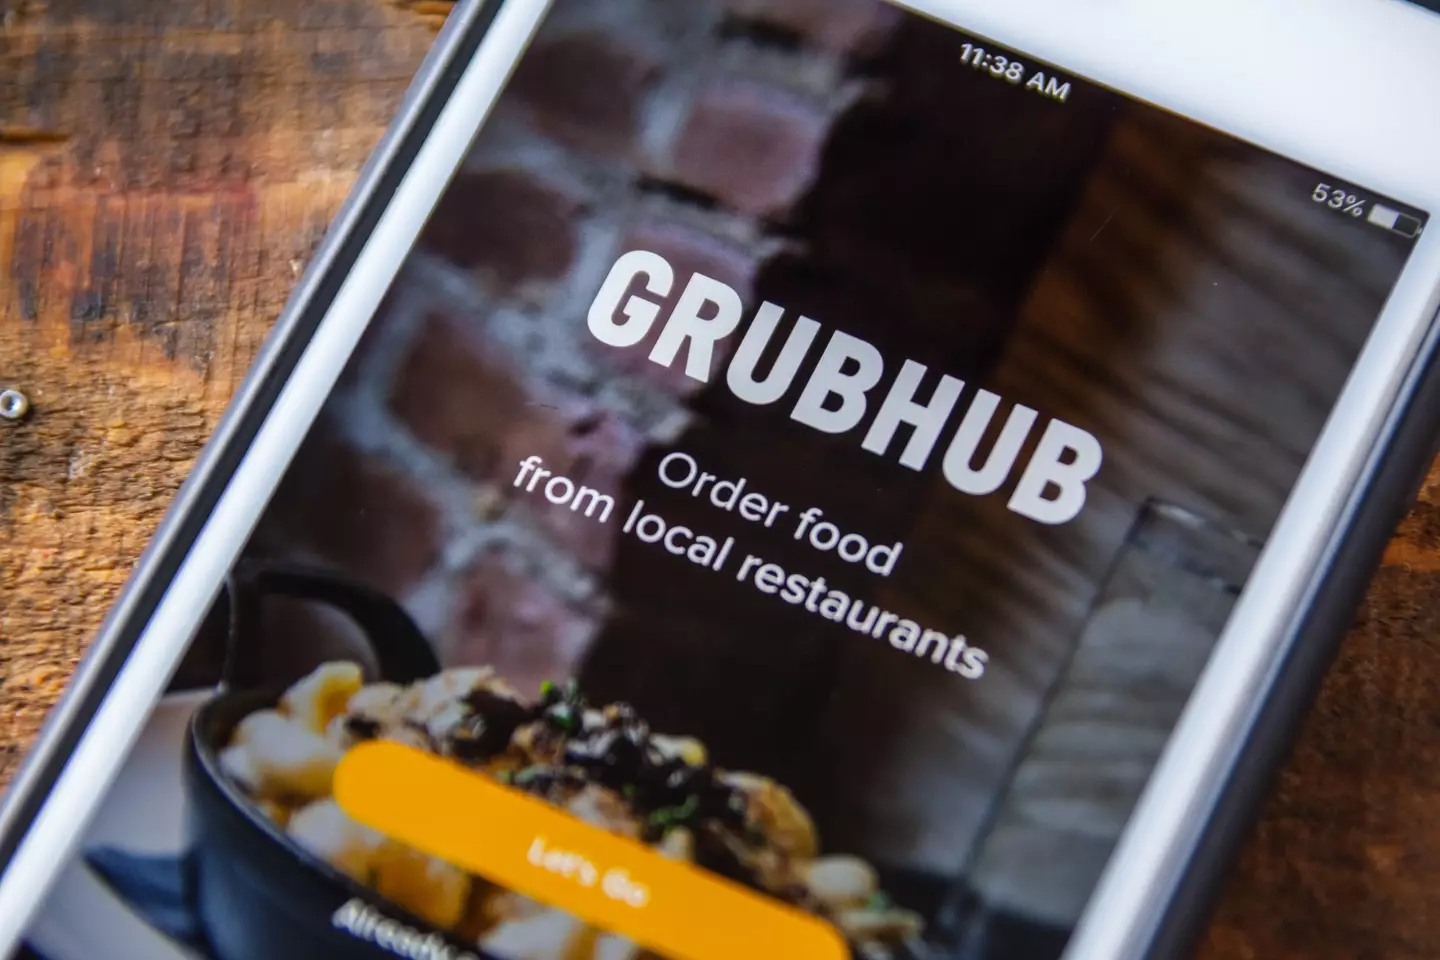 The woman was able to call for help using the Grubhub app.